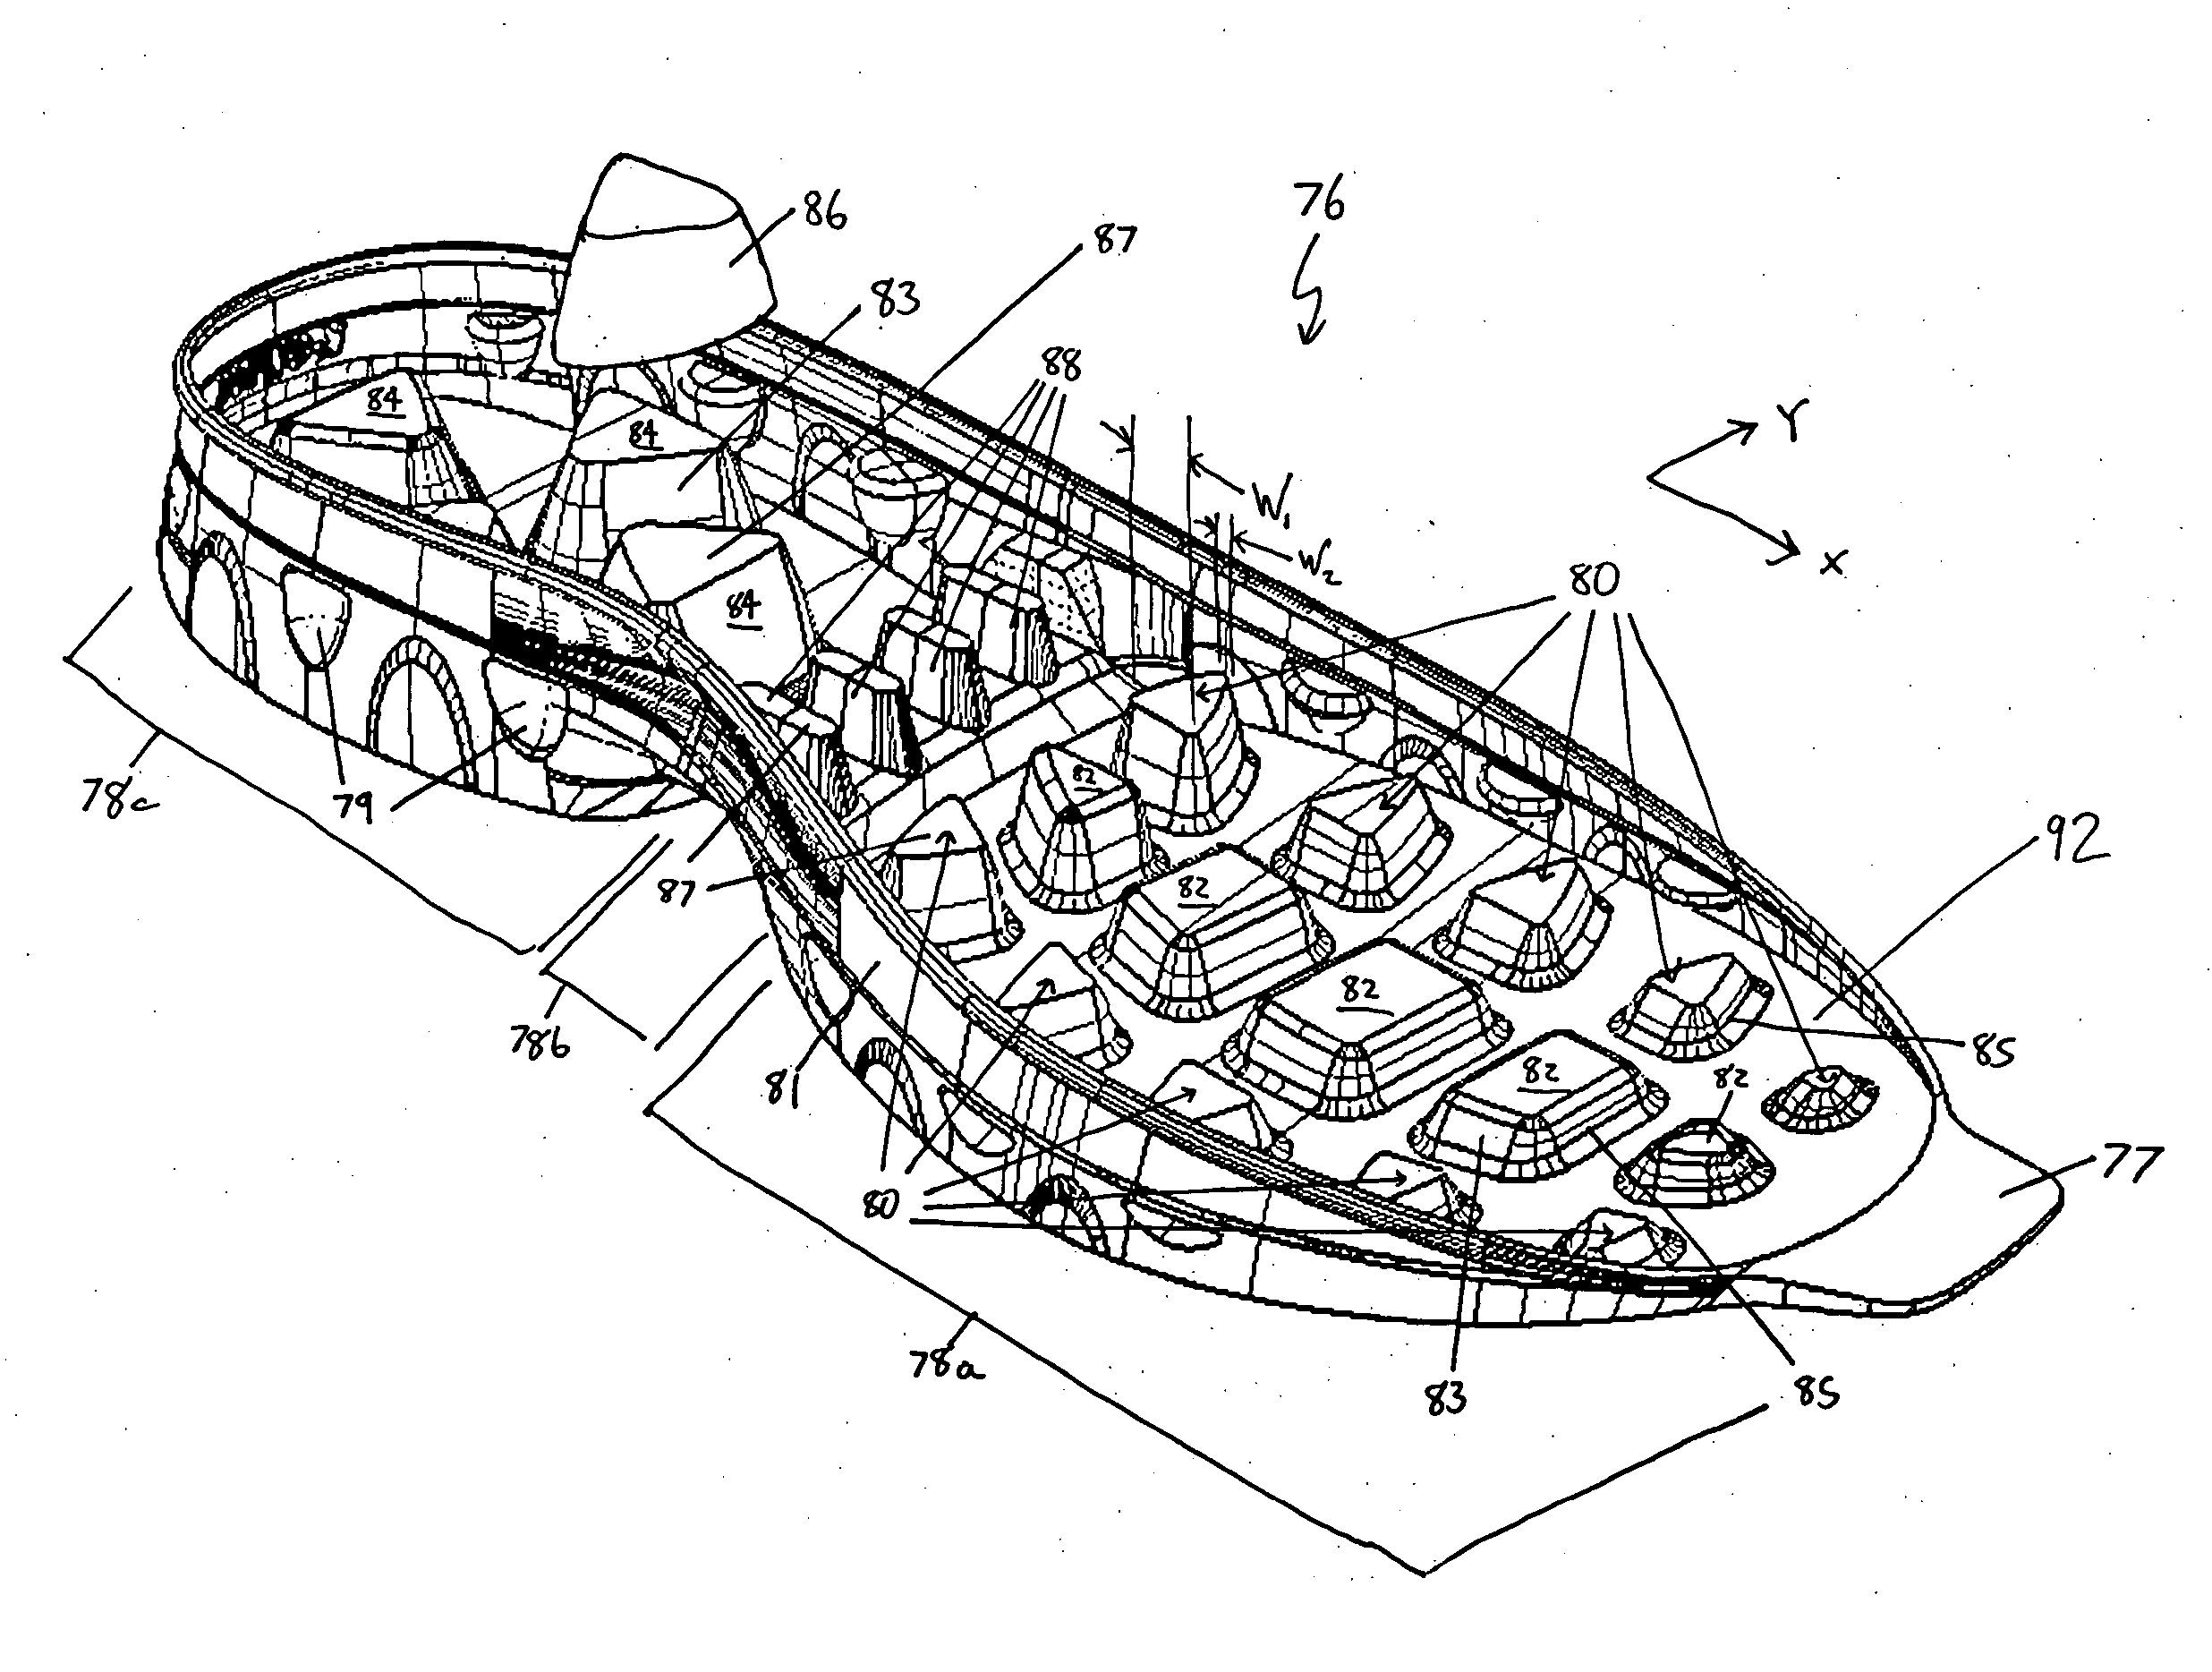 Method for forming footwear structures using thermoforming